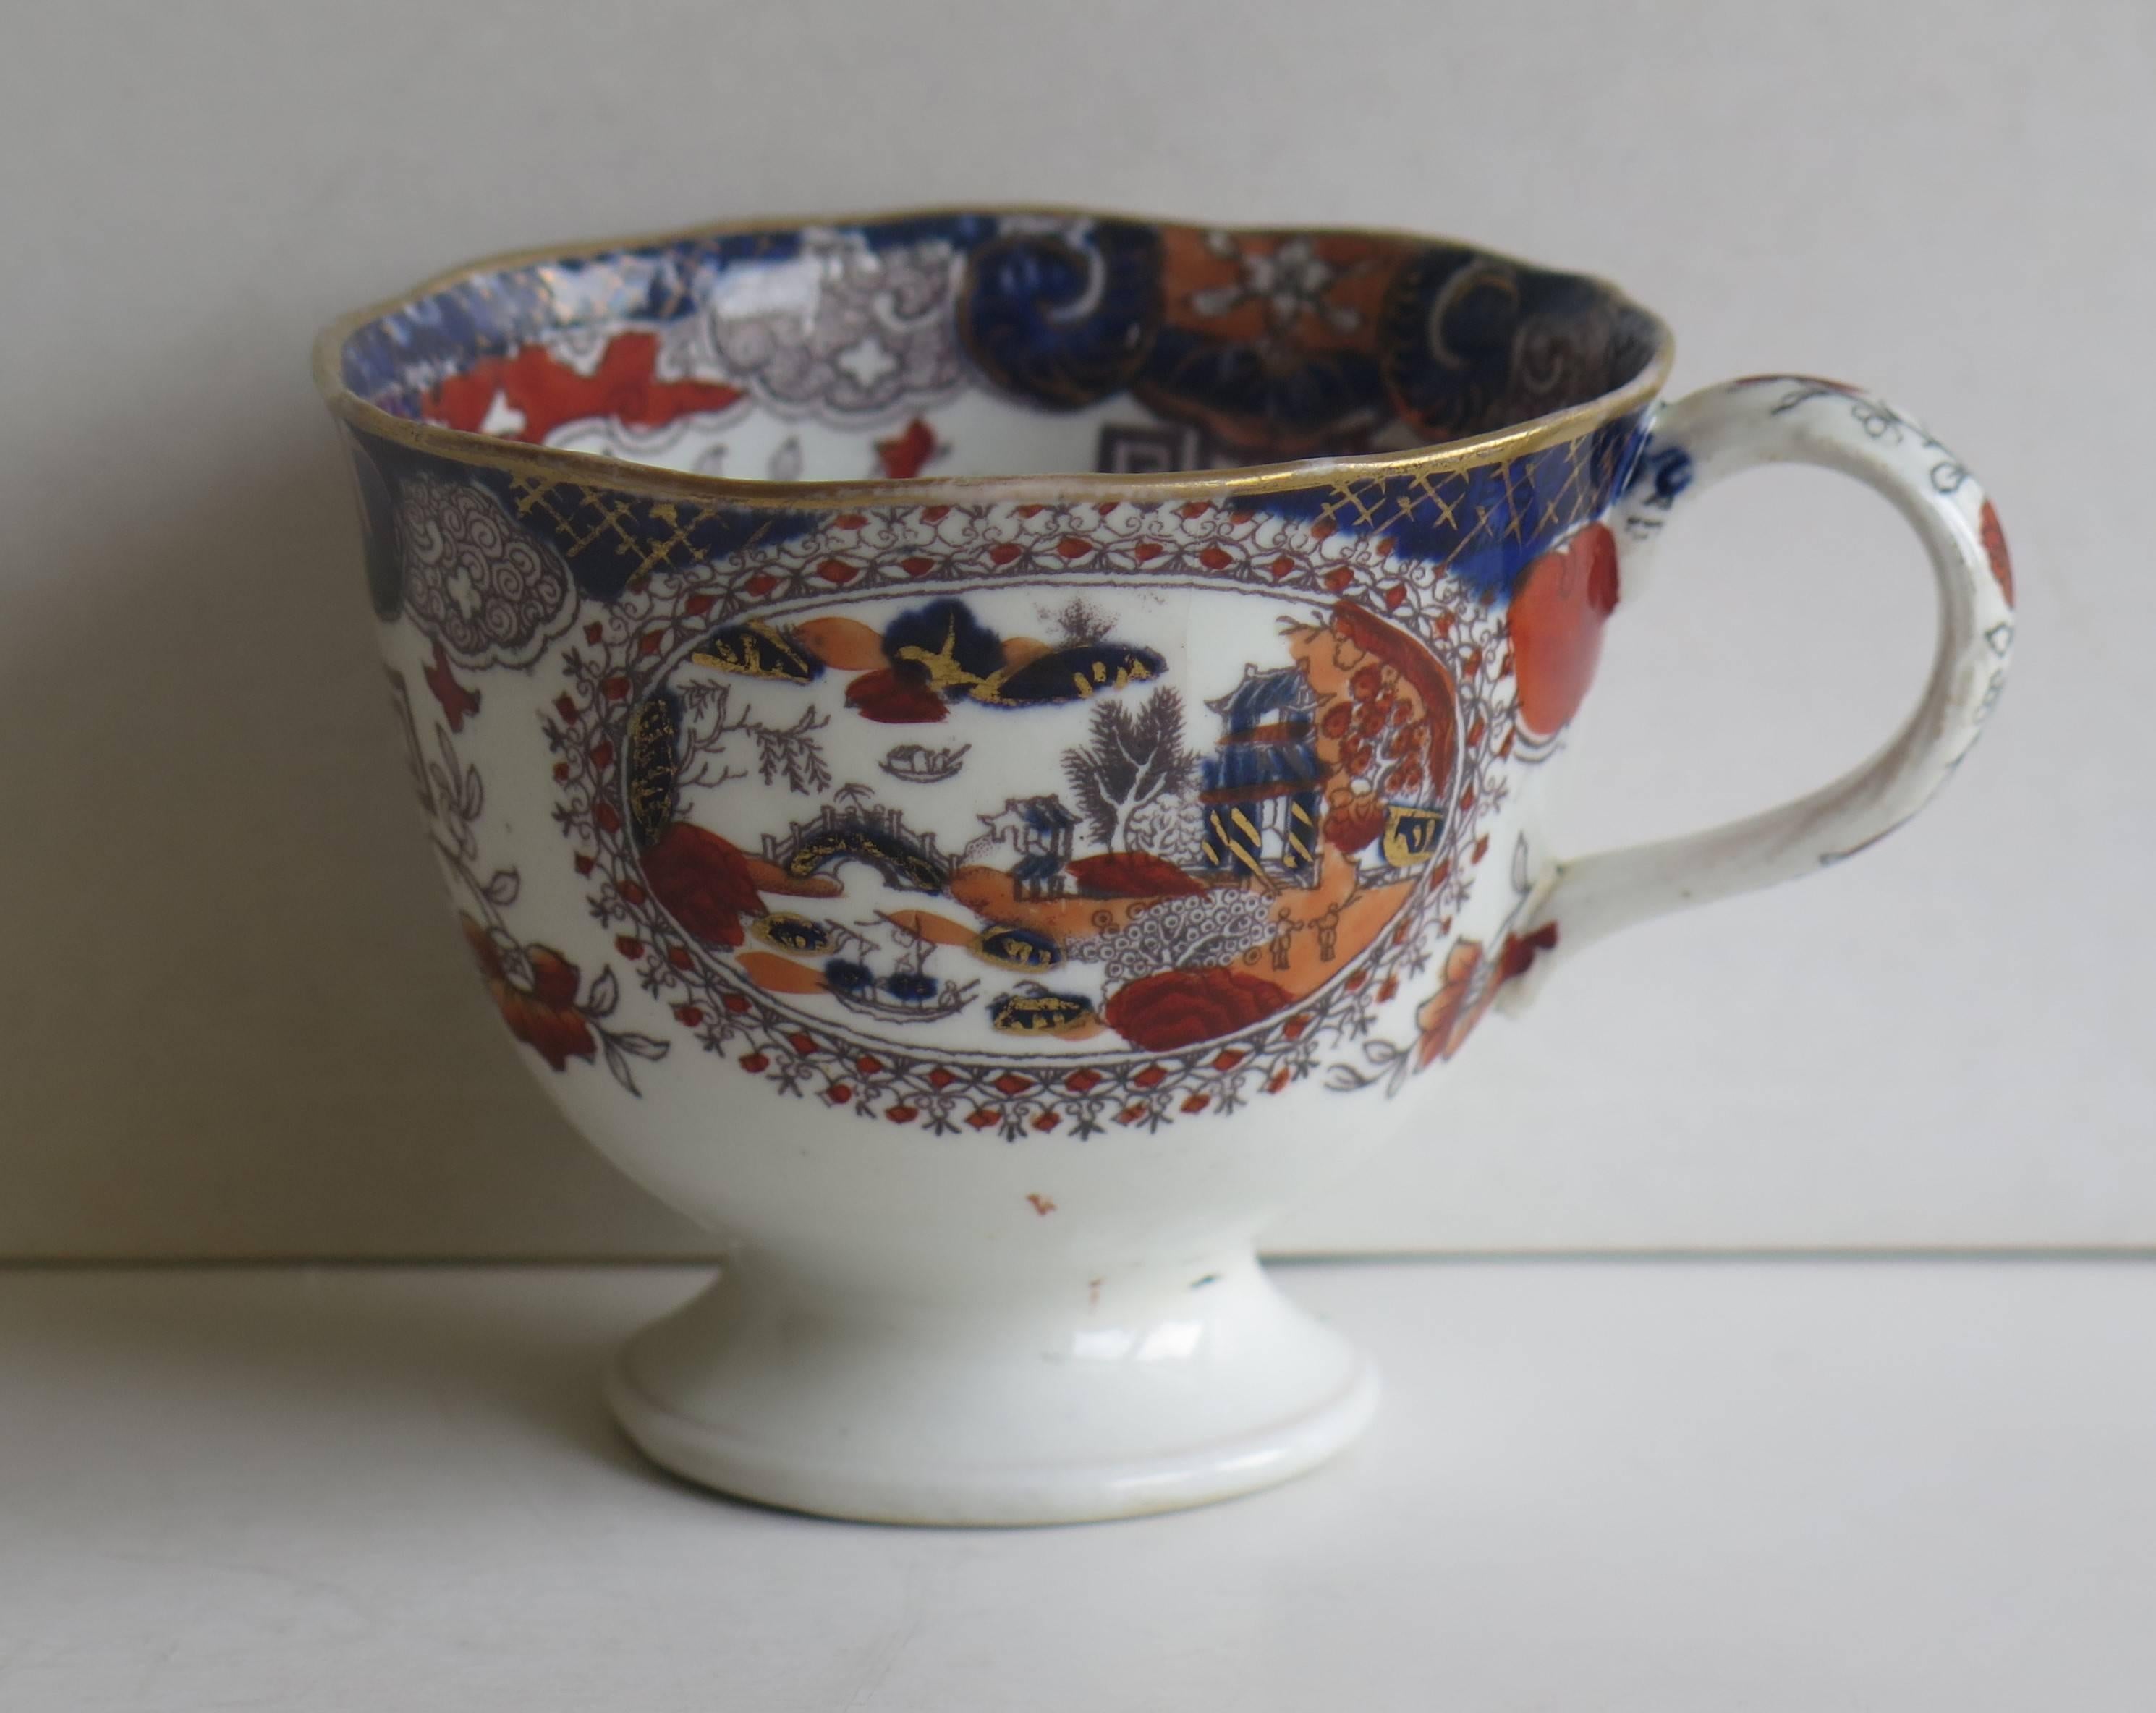 This is a footed ironstone China coffee cup made by Mason's of Lane Delph, Staffordshire, England, during the early part of the 19th century.

Individual coffee cups like this are hard to find.

The pattern is number 303, called 